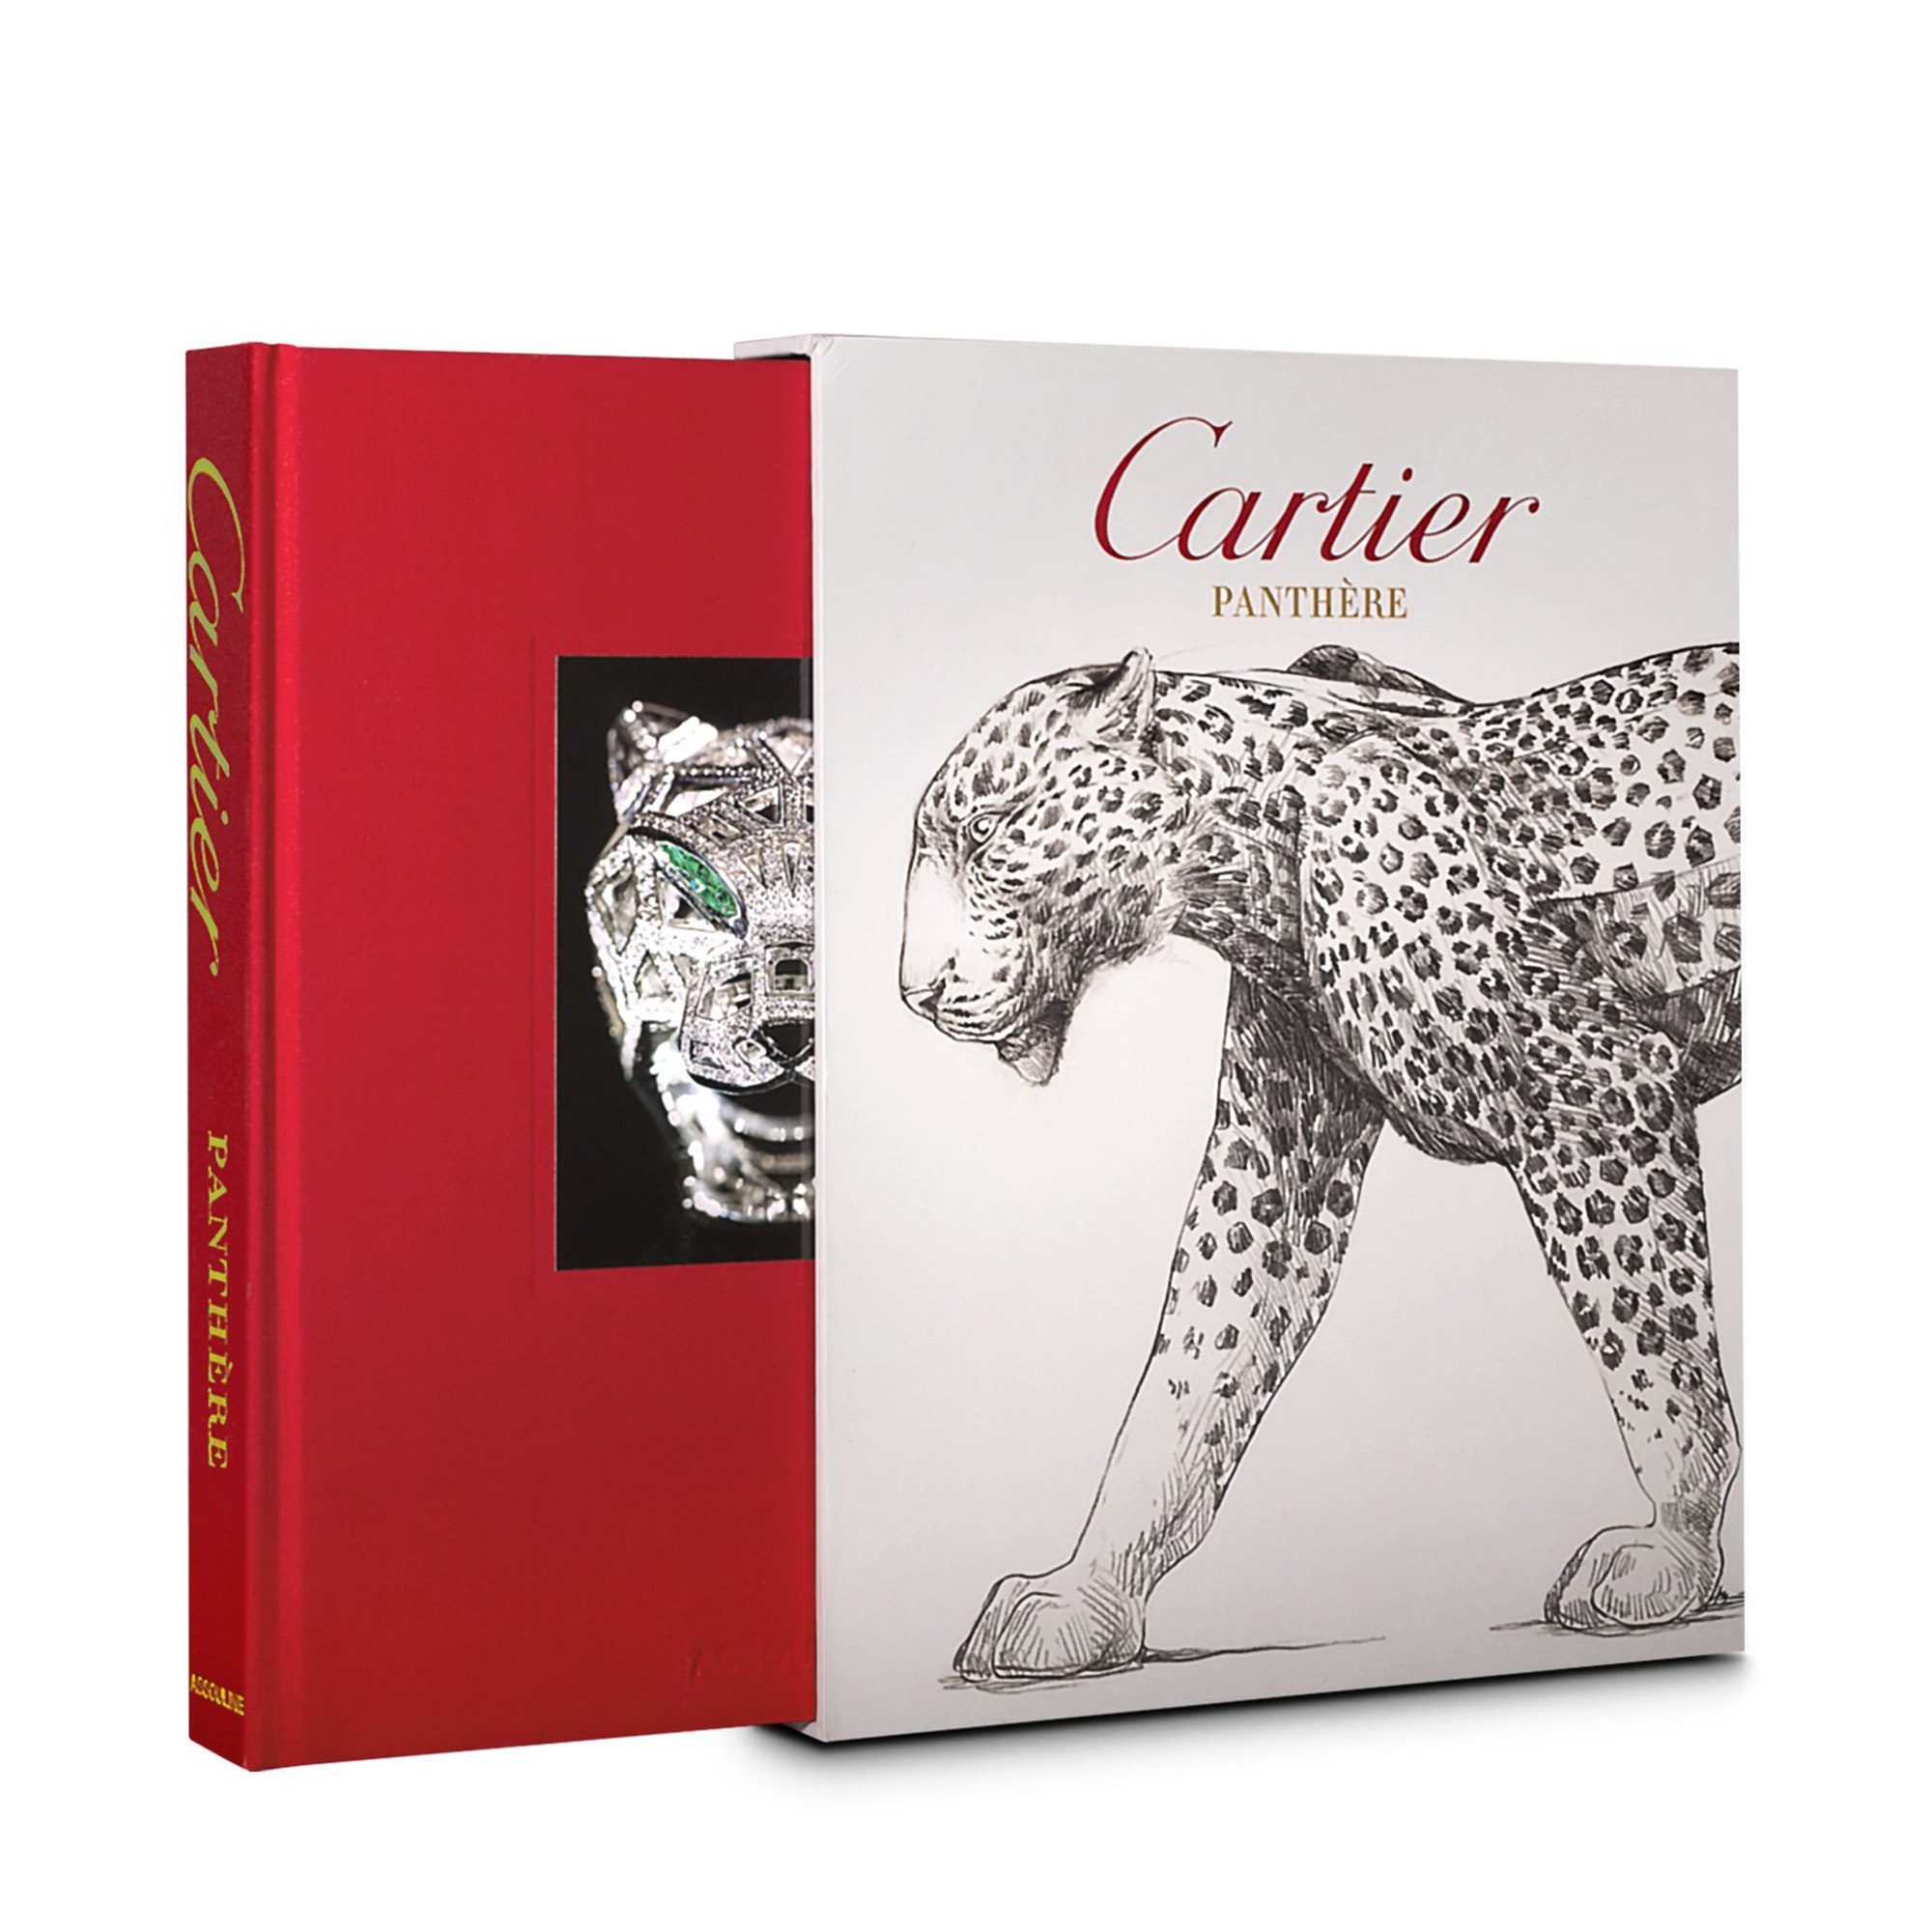 A red book cover and a white box, both featuring a panther illustration as a leading symbol in Cartier's iconography, representing power, seduction, and triumph. It is deeply connected to 20th-century women of style and modern femininity, becoming Cartier's most iconic motif,  evoking fantasies and dreams.